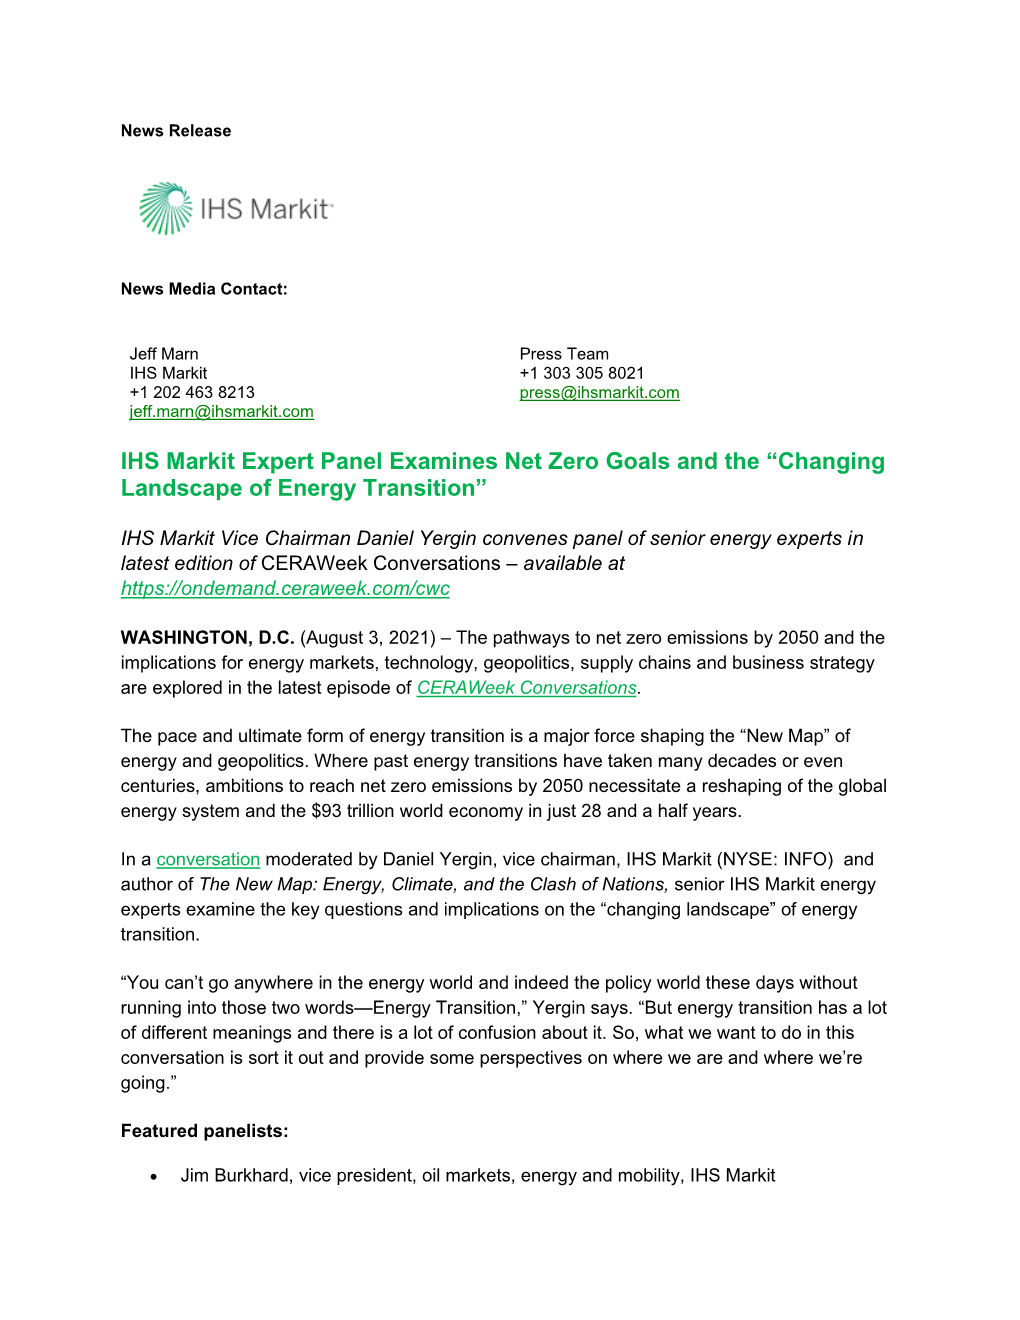 IHS Markit Expert Panel Examines Net Zero Goals and the “Changing Landscape of Energy Transition”